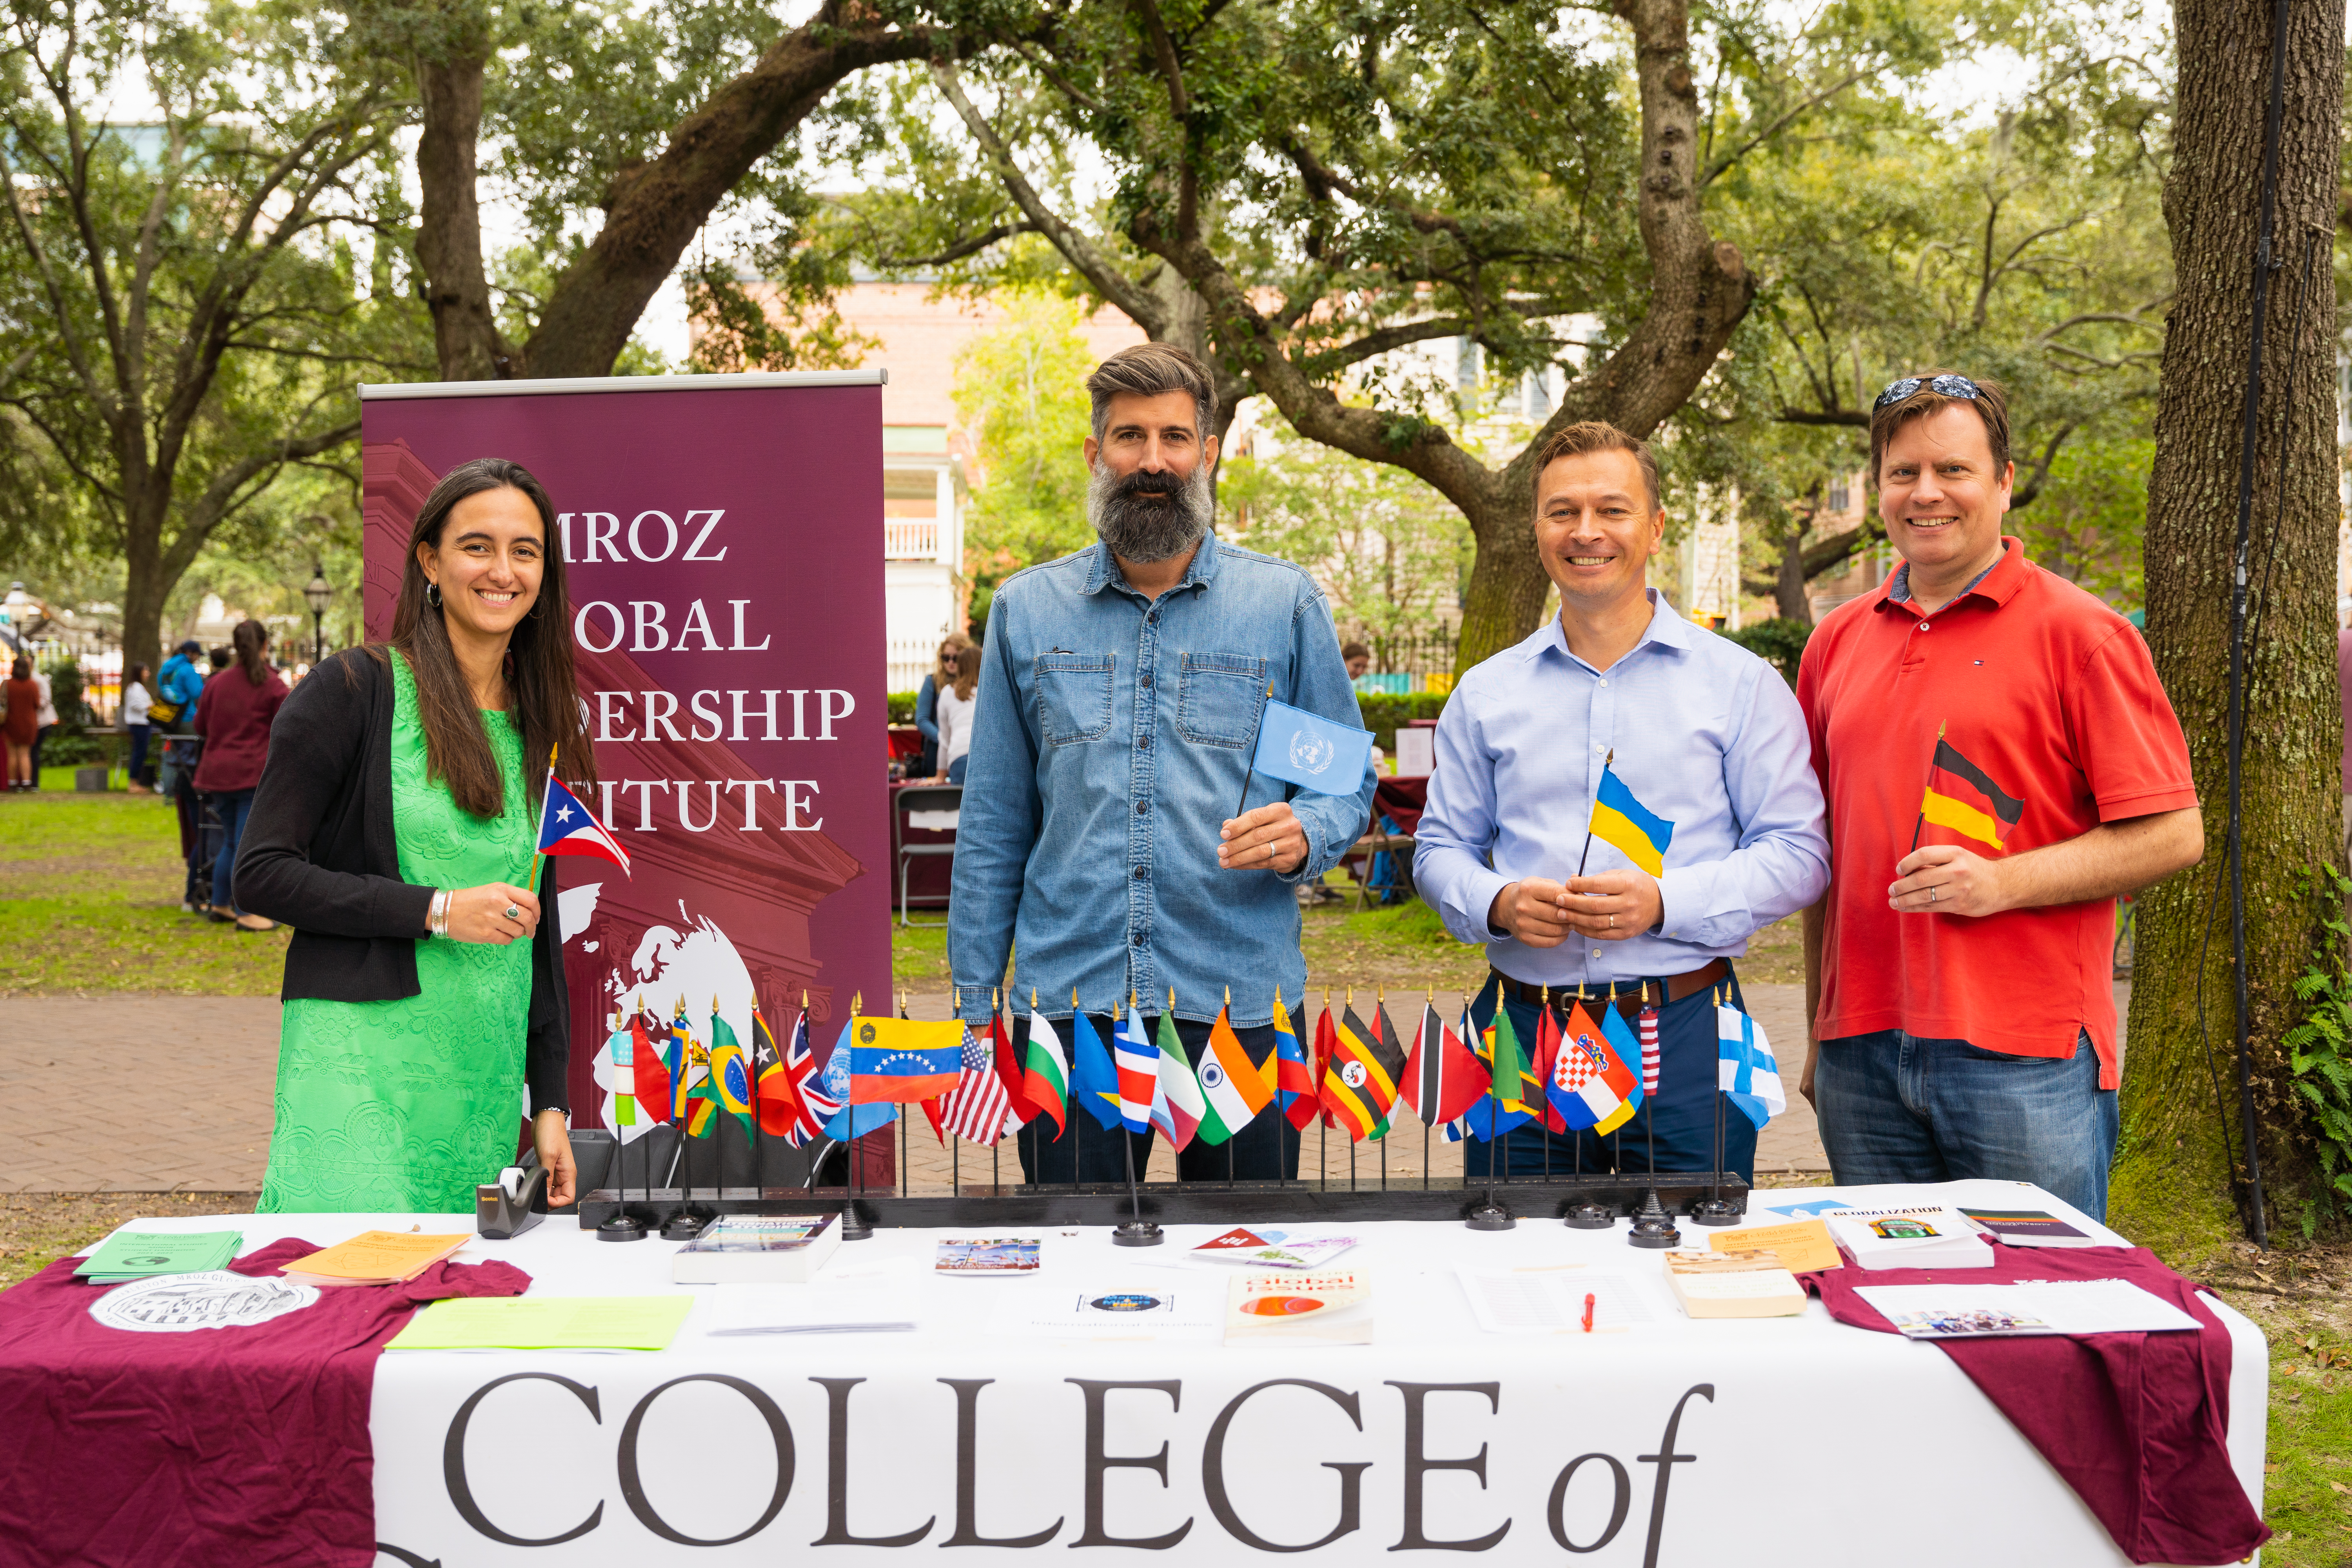 One female and three male professors (Drs. Bea Maldonado, Blake Scott, Max Kovalov, and Malte Pehl, respectively) standing behind a table with a rack of mini flags of countries from around the world.